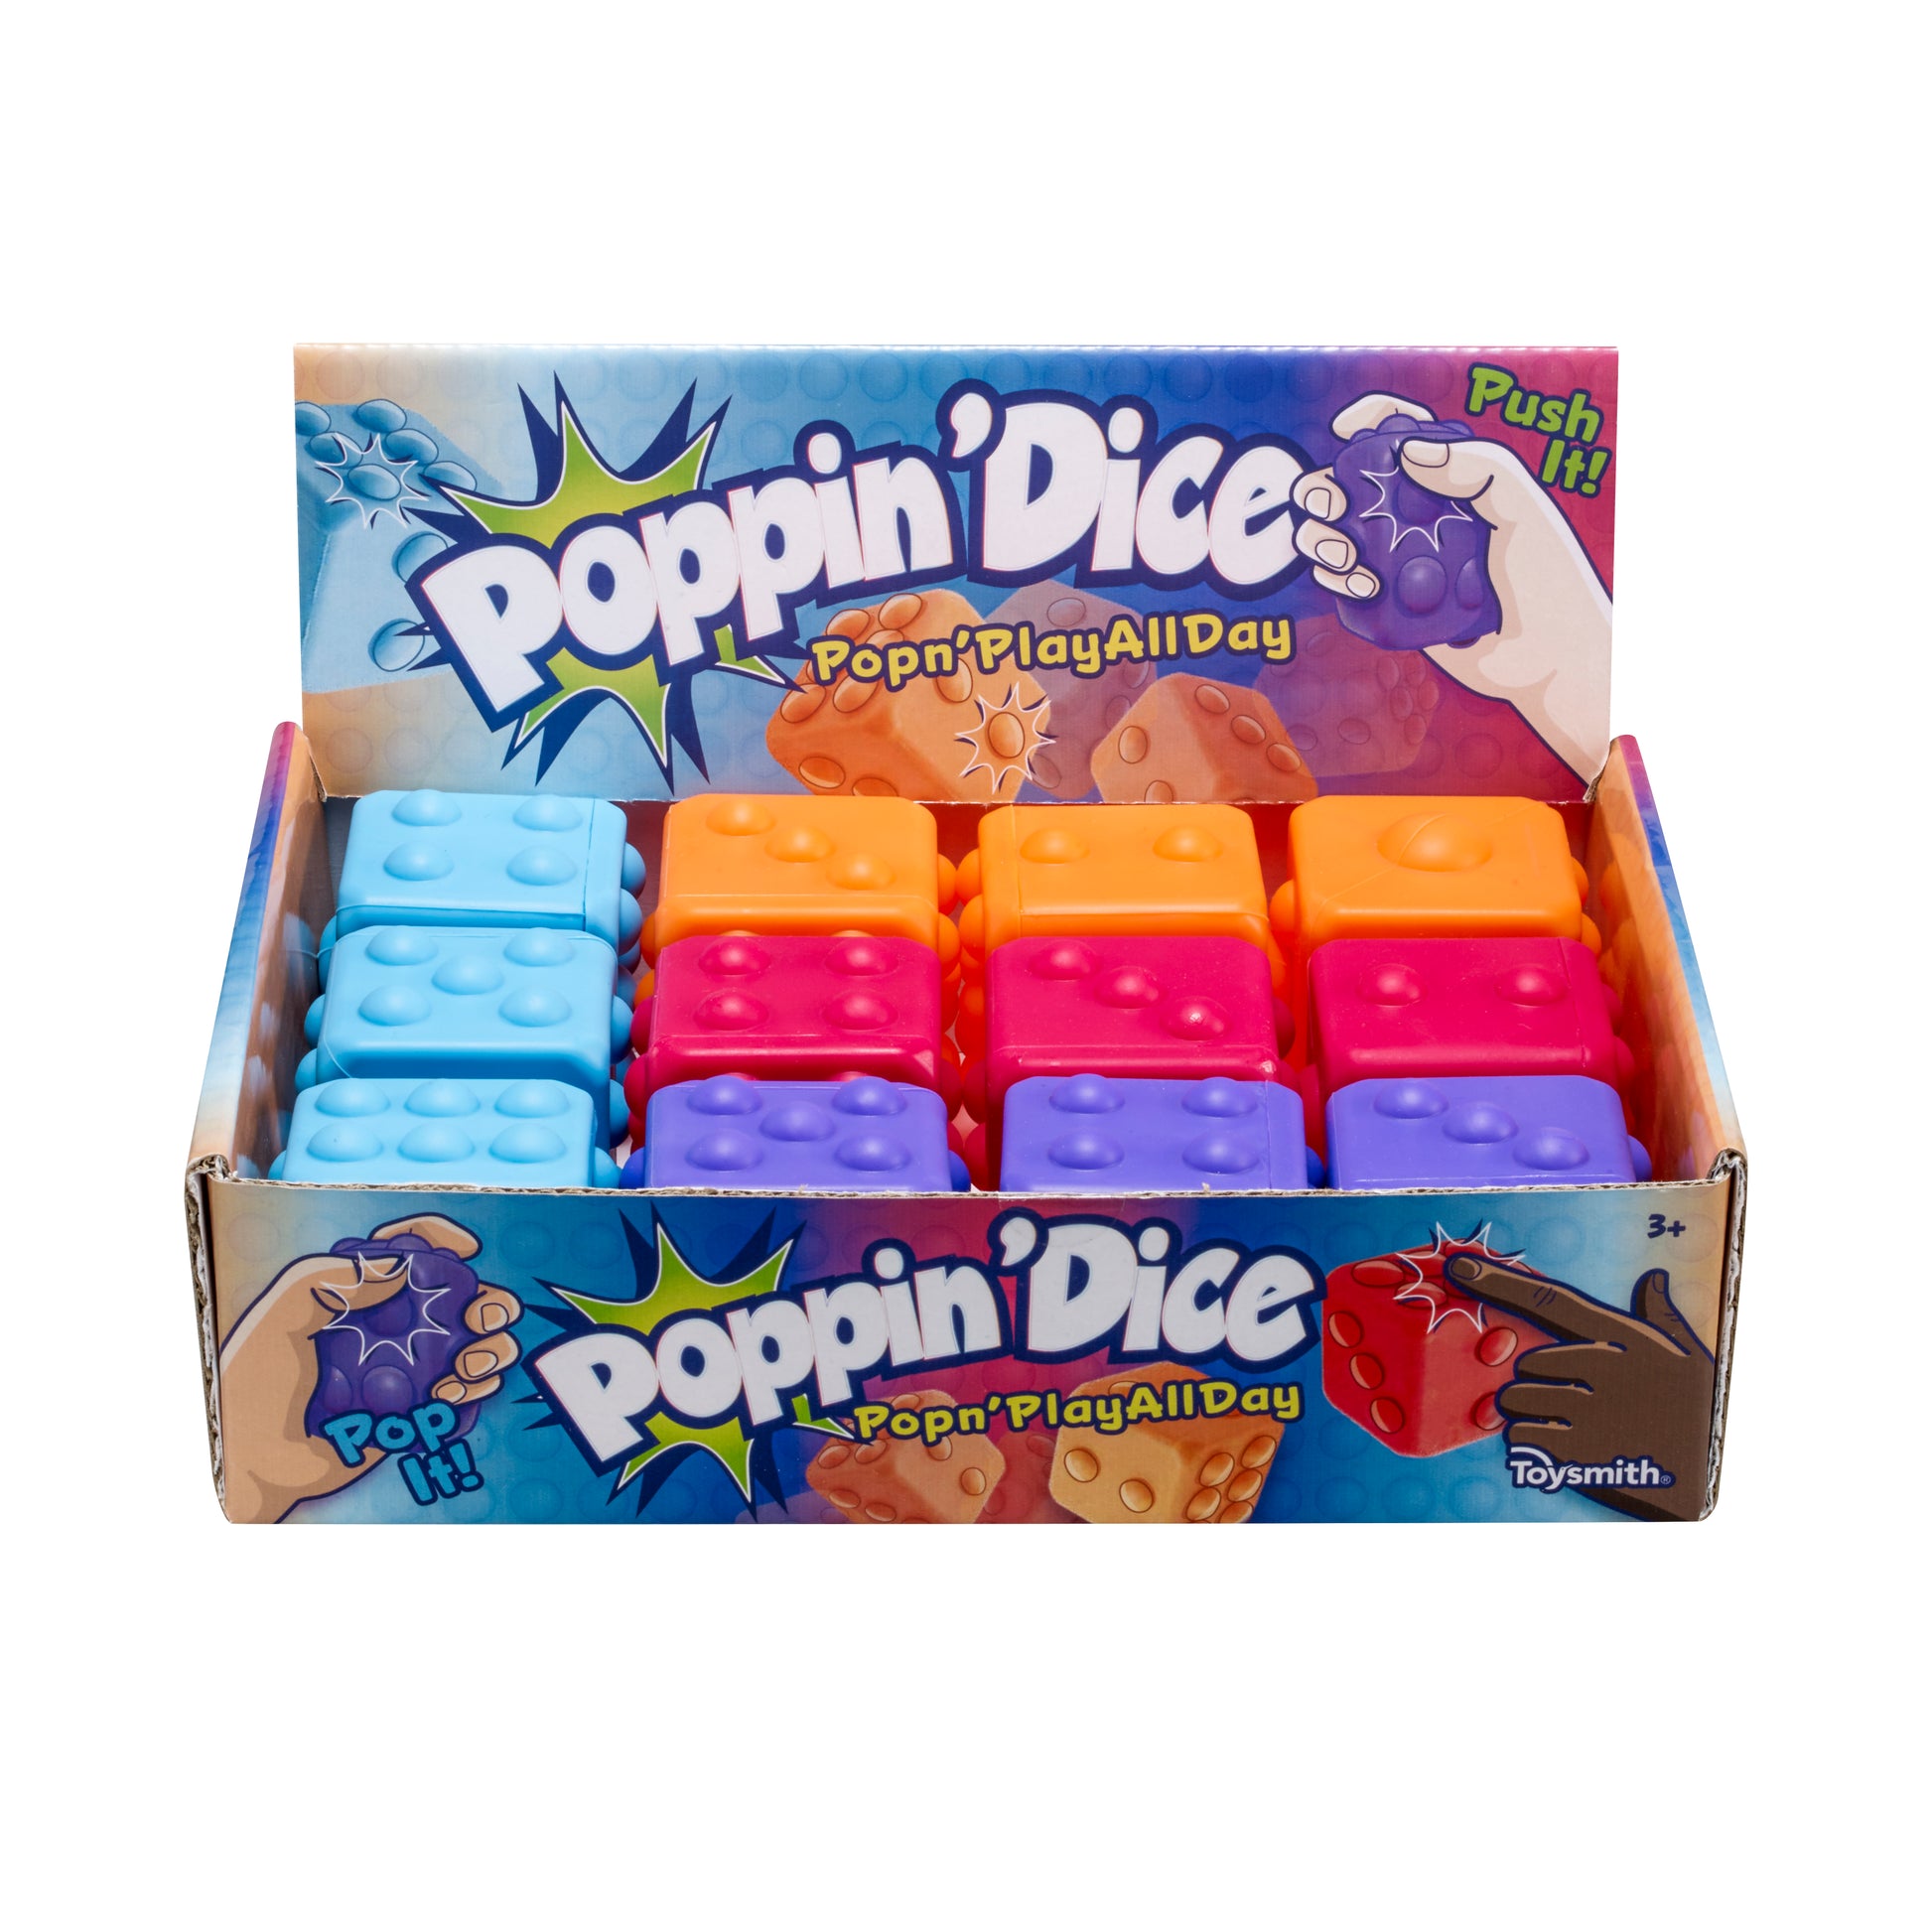 A retail box showing assorted colors of Poppin' Dice